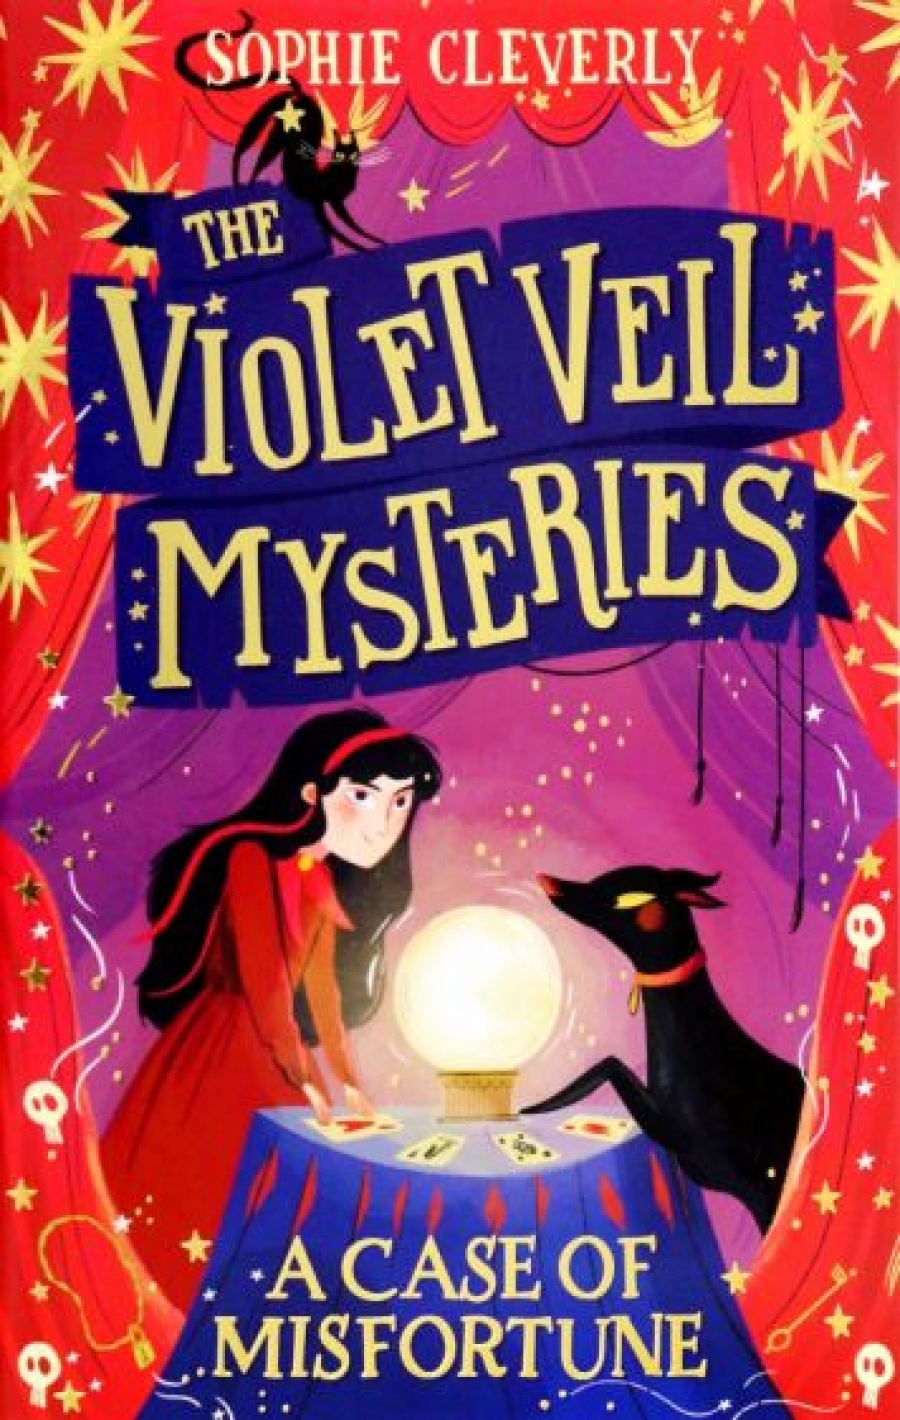 Cleverly Sophie The Violet Veil Mysteries. A Case of Misfortune 